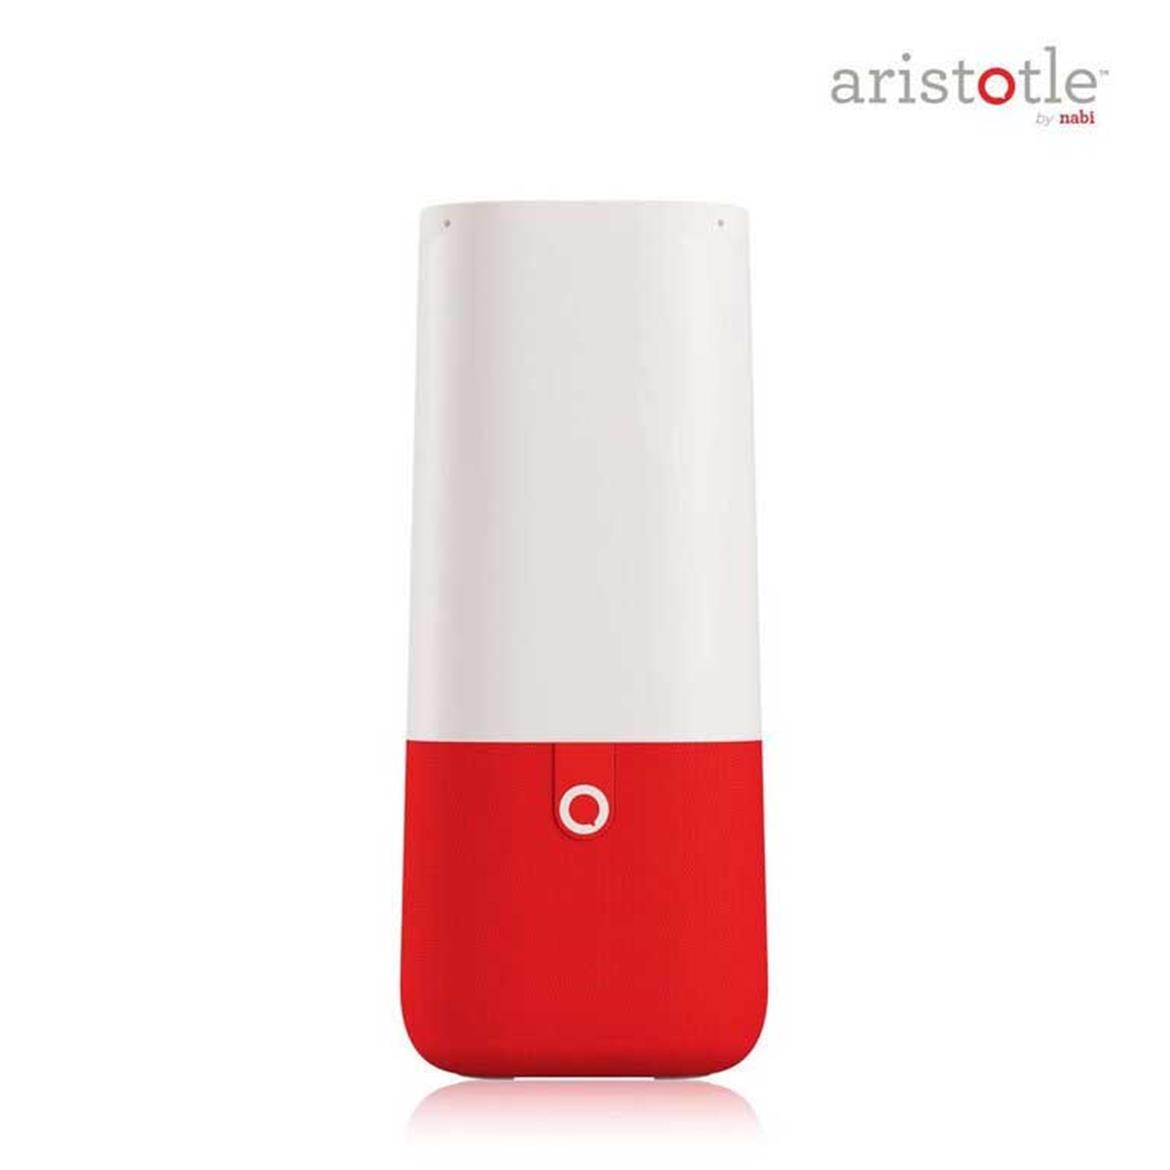 Mattel Axes Kid-Friendly Aristotle AI Smart Speaker Due To Privacy Concerns